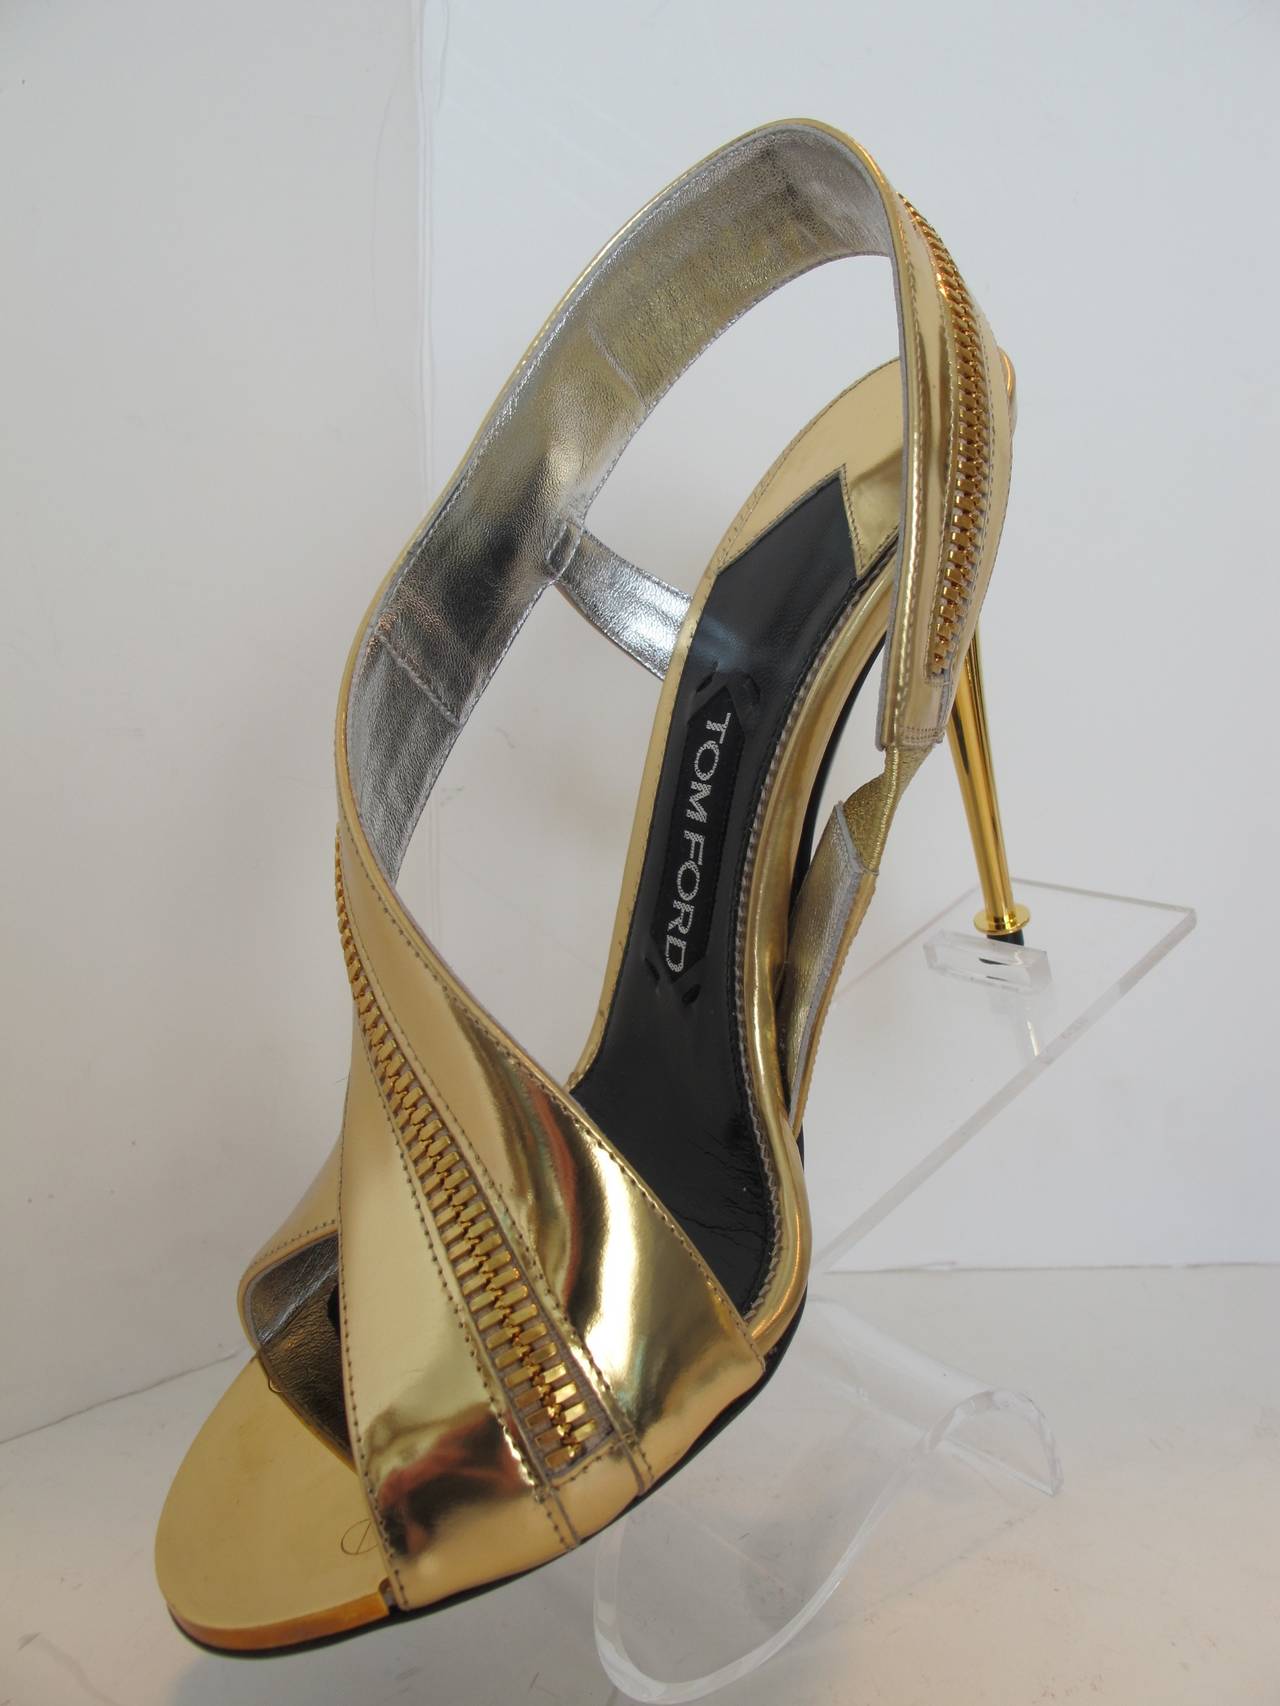 2014 Tom Ford Gold Sling Back Sandal with Wrap Around Zipper For Sale 2